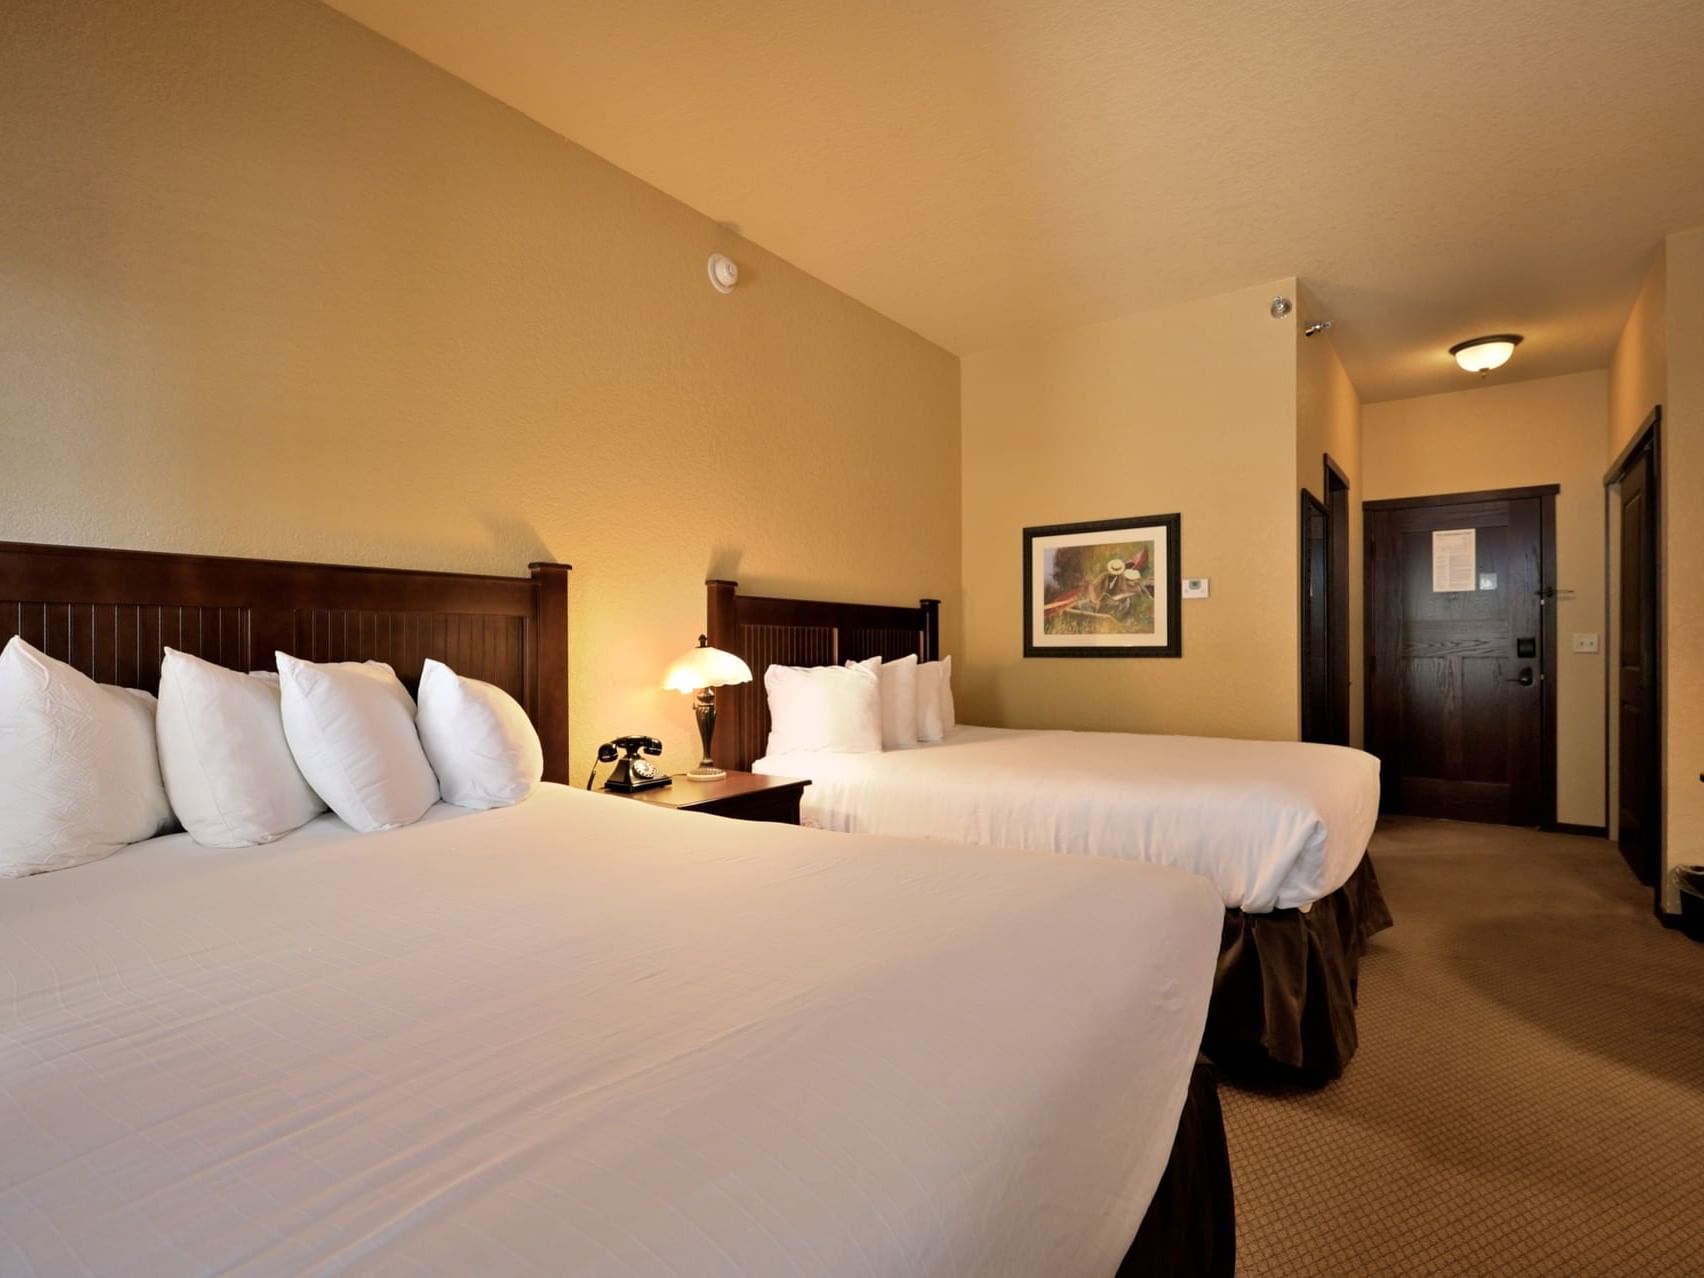 2 Queen Classic Room with queen size beds at Chase on The Lake